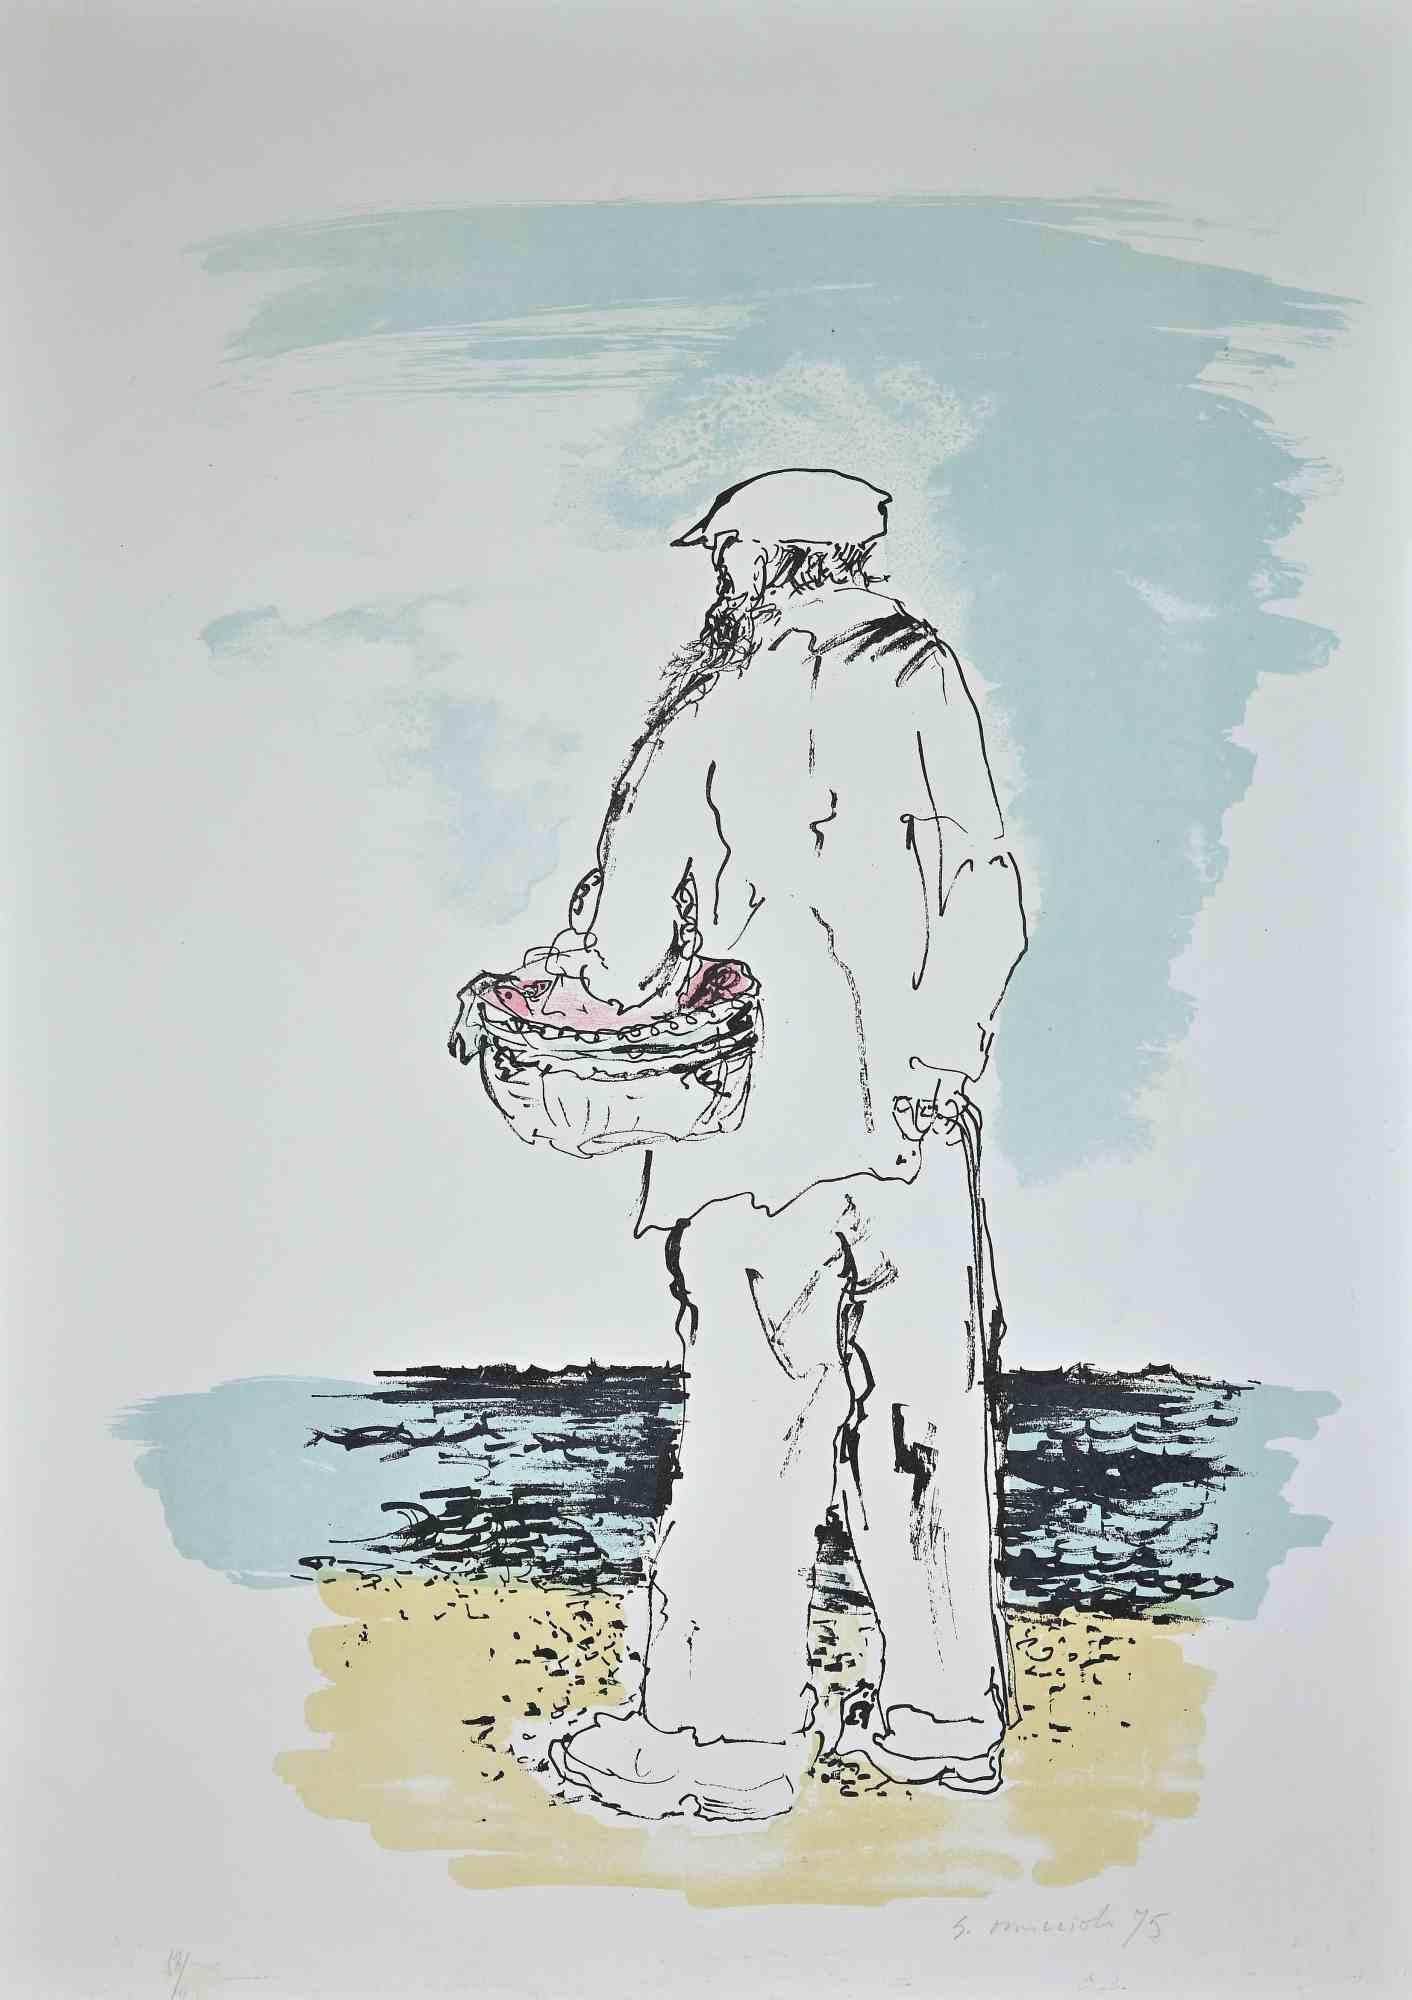 The fisherman is an original artwork realized in 1975 by Giovanni Omiccioli (February 25, 1901 – March 1, 1975).

Original Colored Lithograph o paper.

Hand-signed and dated on the lower right corner in pencil by the artist: Omiccioli 1975.